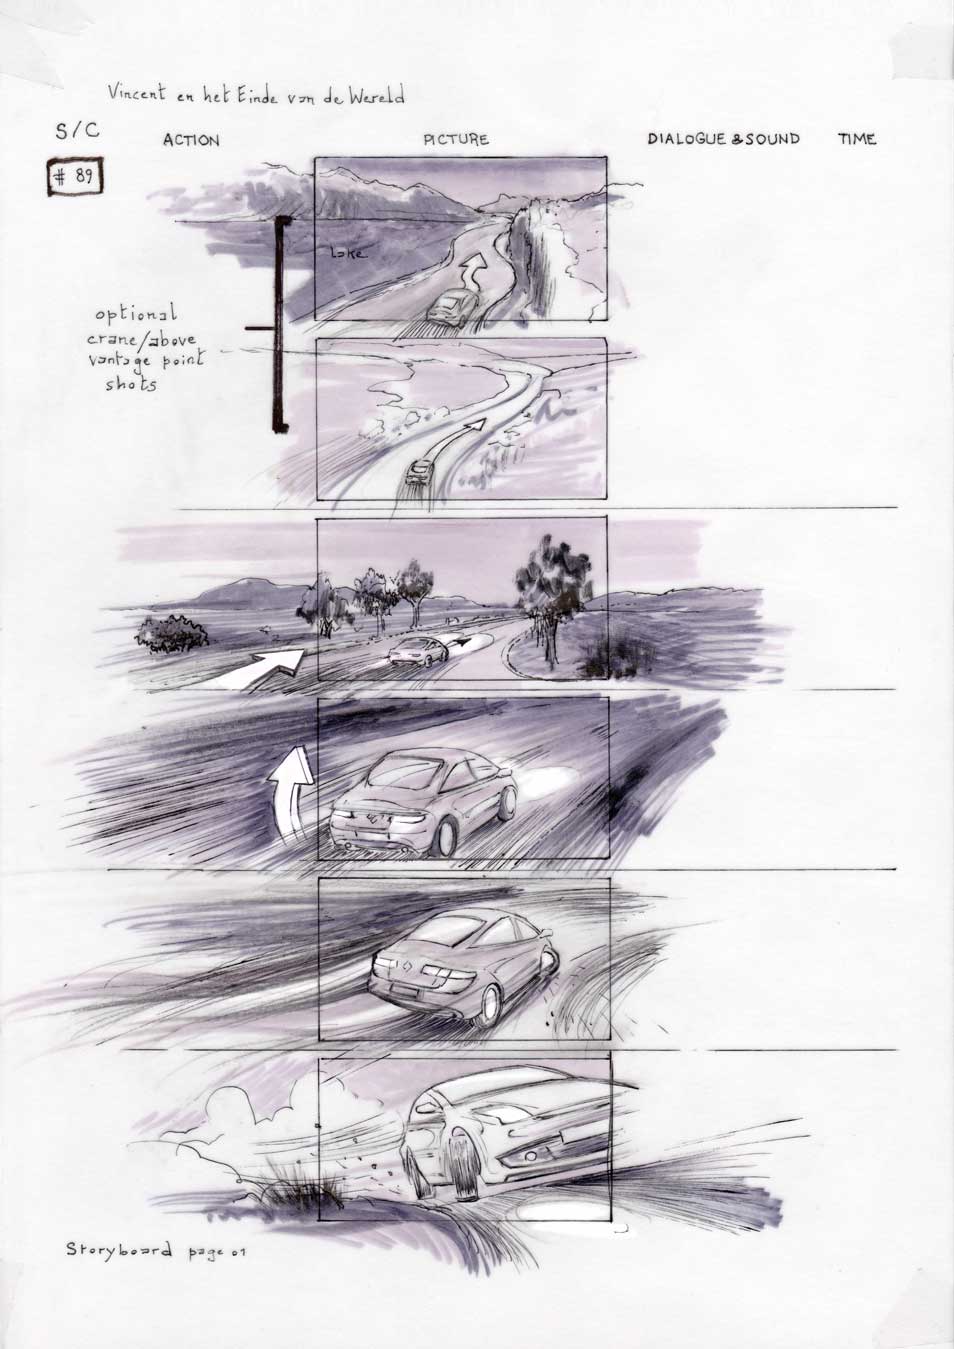 Vincent and the End of the World storyboard 01